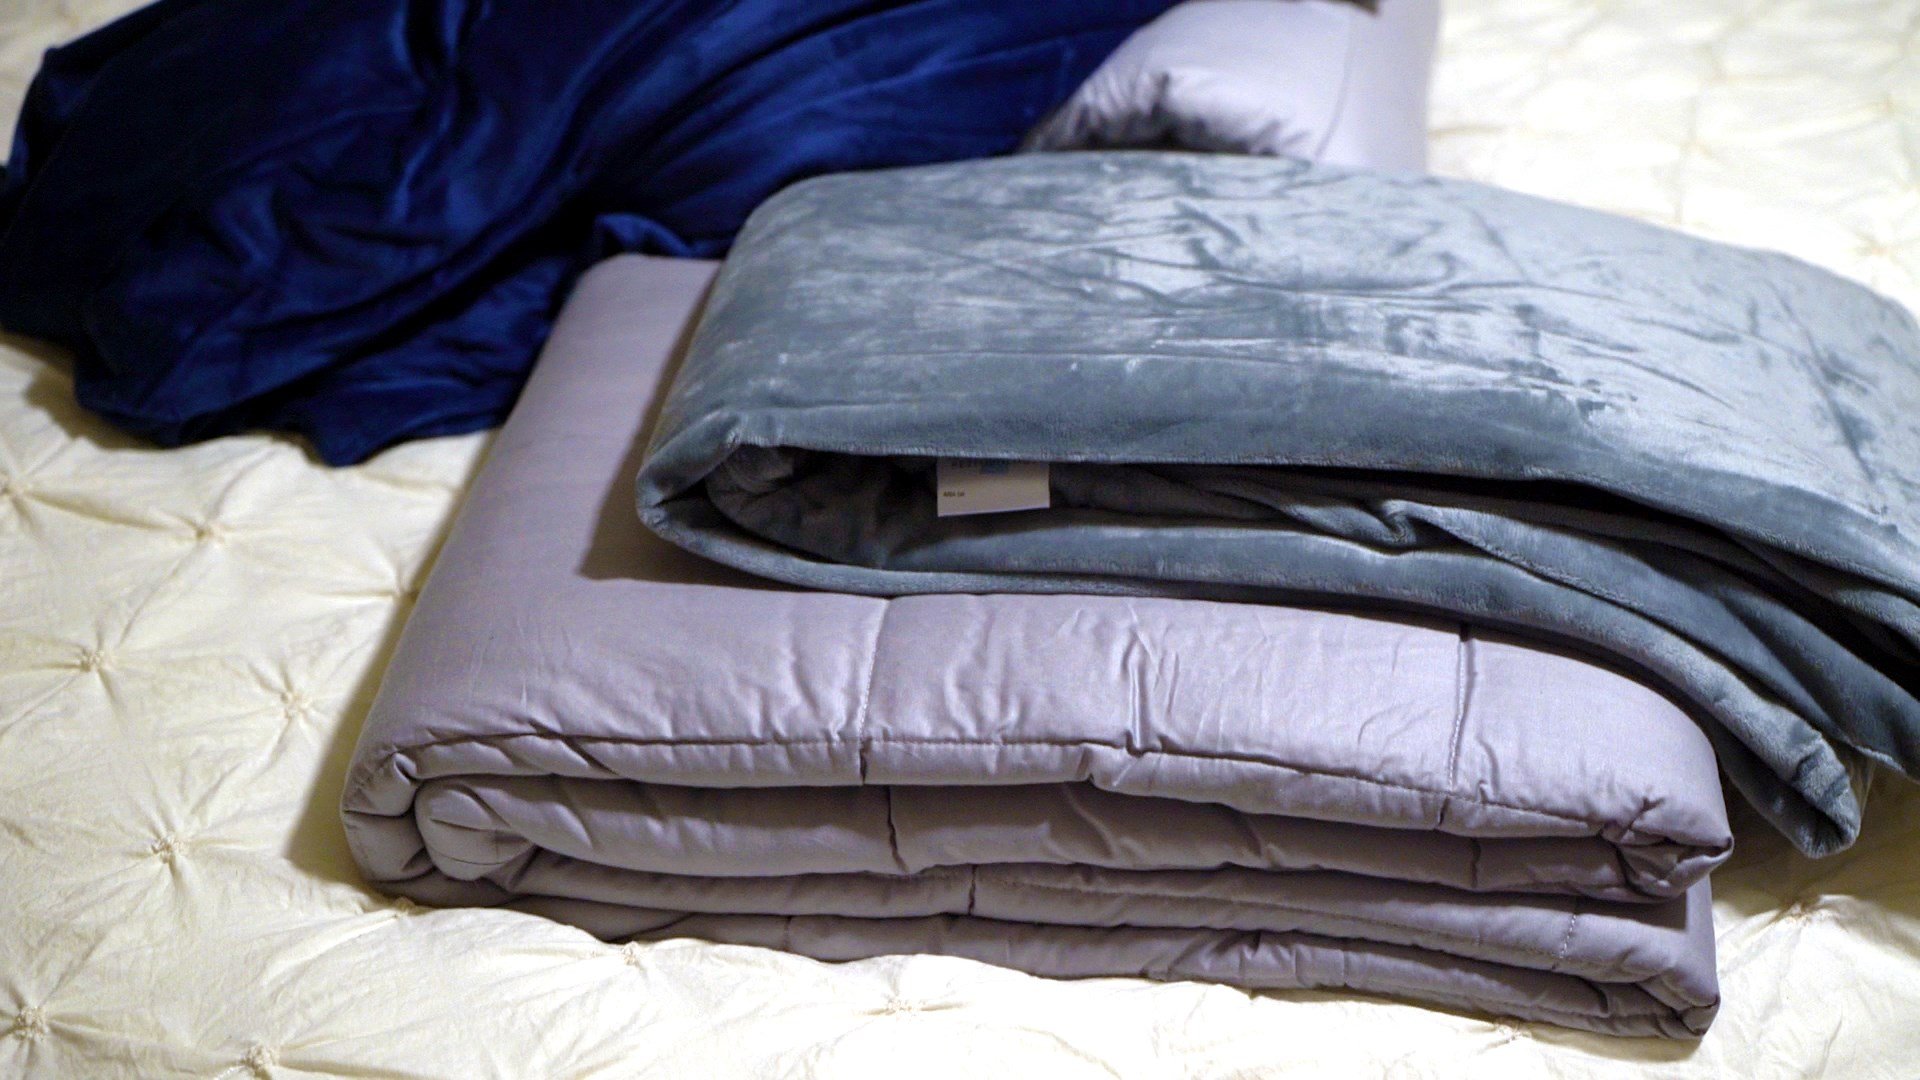 This weighted blanket can help you sleep better and save you $12 - The